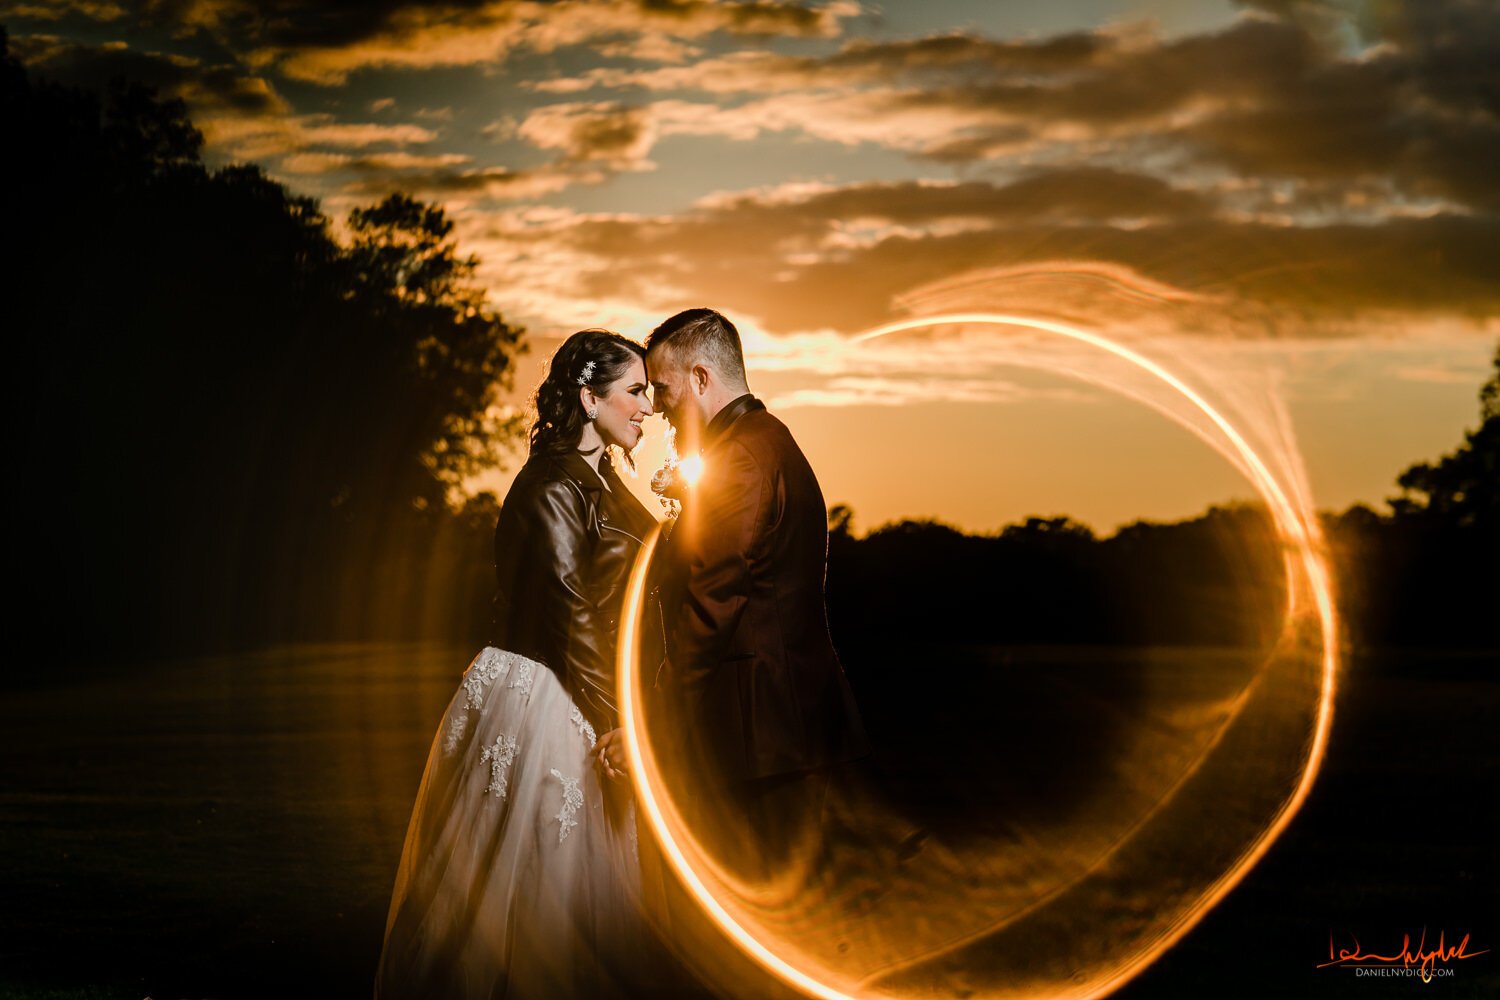 epic ring of fire silhouette nj wedding